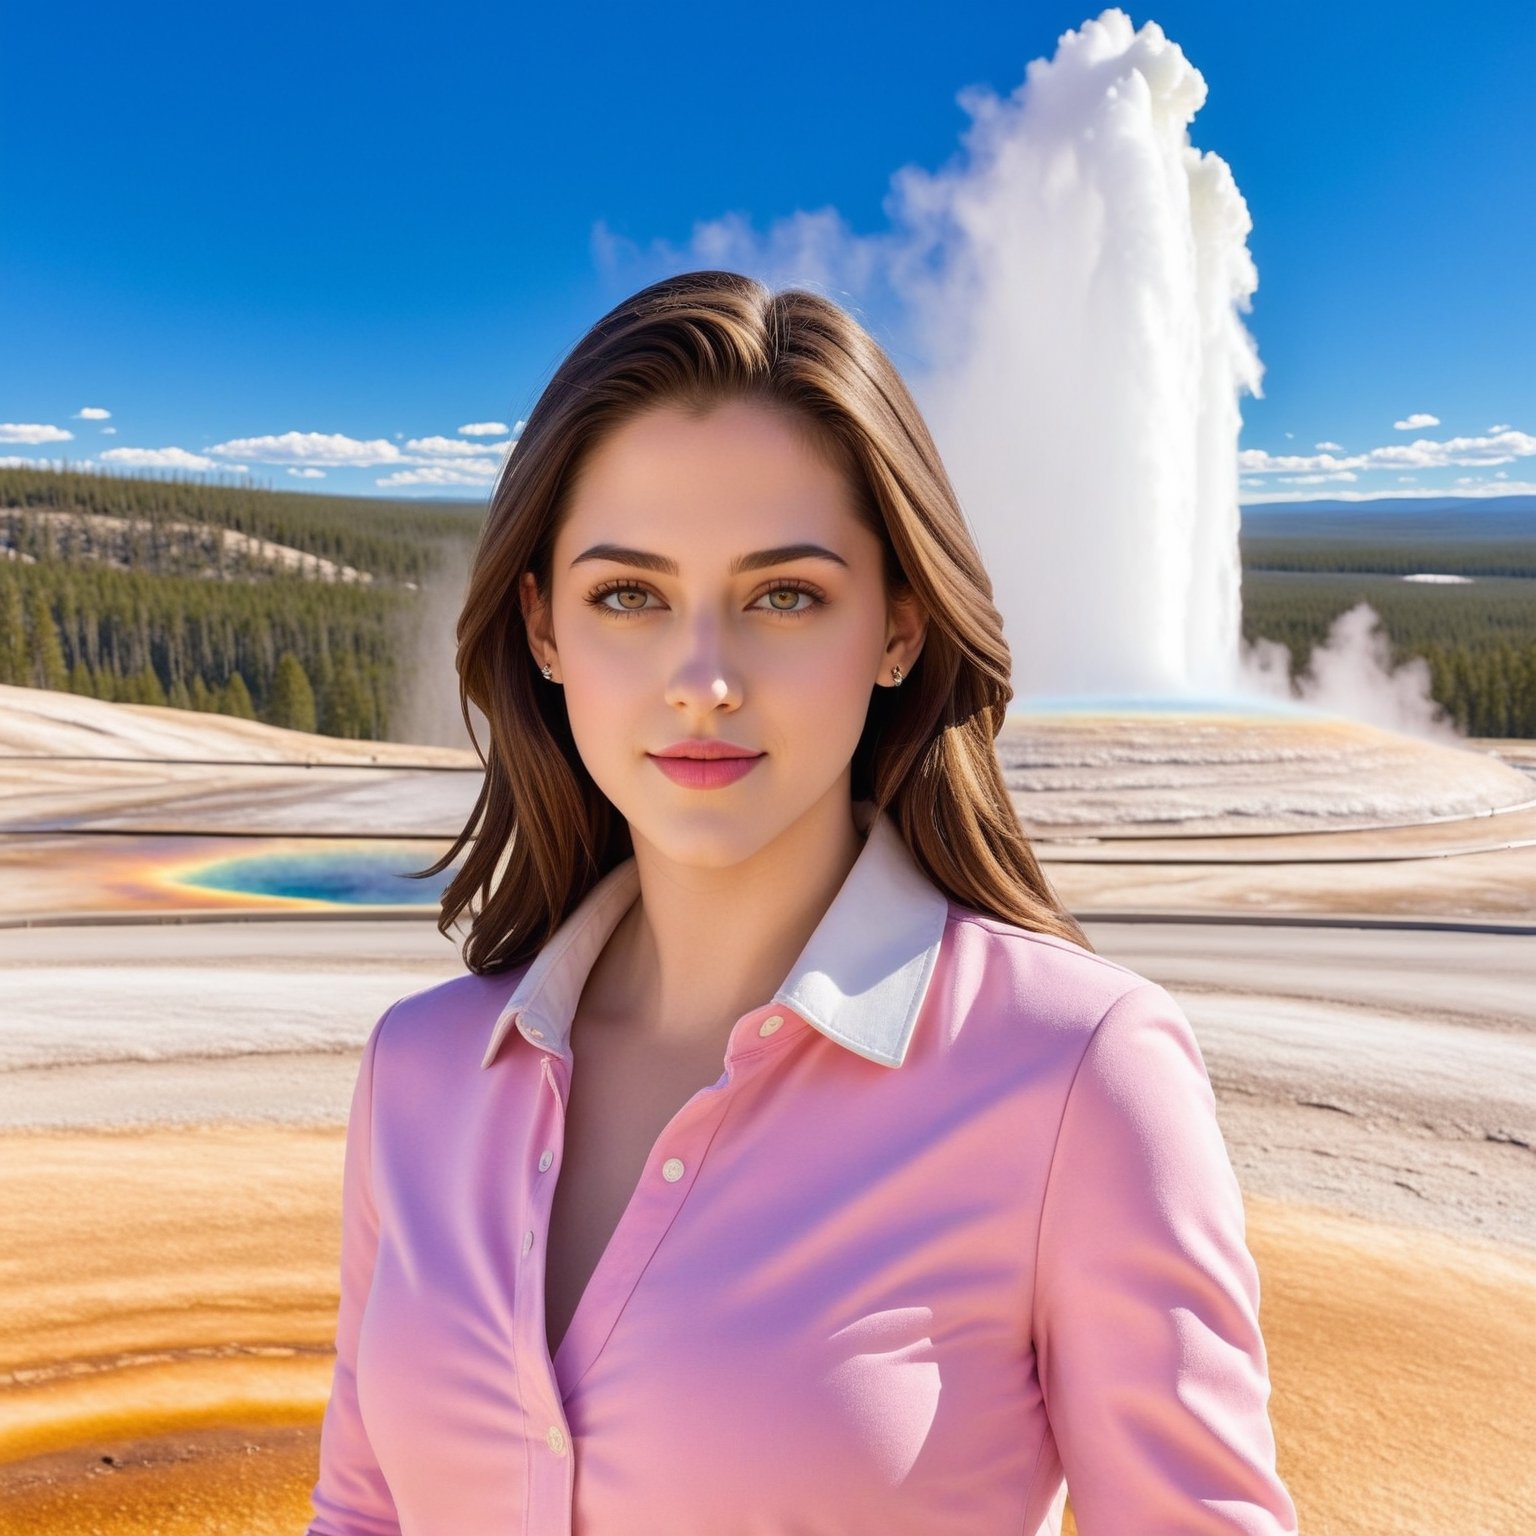 ((Hyper-Realistic)) upperbody photo of a beautiful 1girl taking a selfie in Old Faithful in Yellowstone,20yo,(kristen stewart),detailed exquisite face,detailed soft skin,hourglass figure,perfect female form,model body,looking at viewer,playful smirks,(perfect hands:1.2),(elegant white jacket,pink shirt and jean skirt),(girl focus)
BREAK
((Hyper-Realistic)) detailed photography of Old Faithful \(oldfa1thfu1\) in Yellowstone,outdoors,sky, day,tree,scenery,realistic,photo background,mostly white soil with some brown),(1girl focus)
BREAK
aesthetic,rule of thirds,depth of perspective,perfect composition,studio photo,trending on artstation,cinematic lighting,(Hyper-realistic photography,masterpiece, photorealistic,ultra-detailed,intricate details,16K,sharp focus,high contrast,kodachrome 800,HDR:1.2),photo_b00ster,real_booster,ye11owst0ne,(oldfa1thfu1:1.2),more detail XL,H effect,art_booster,ani_booster